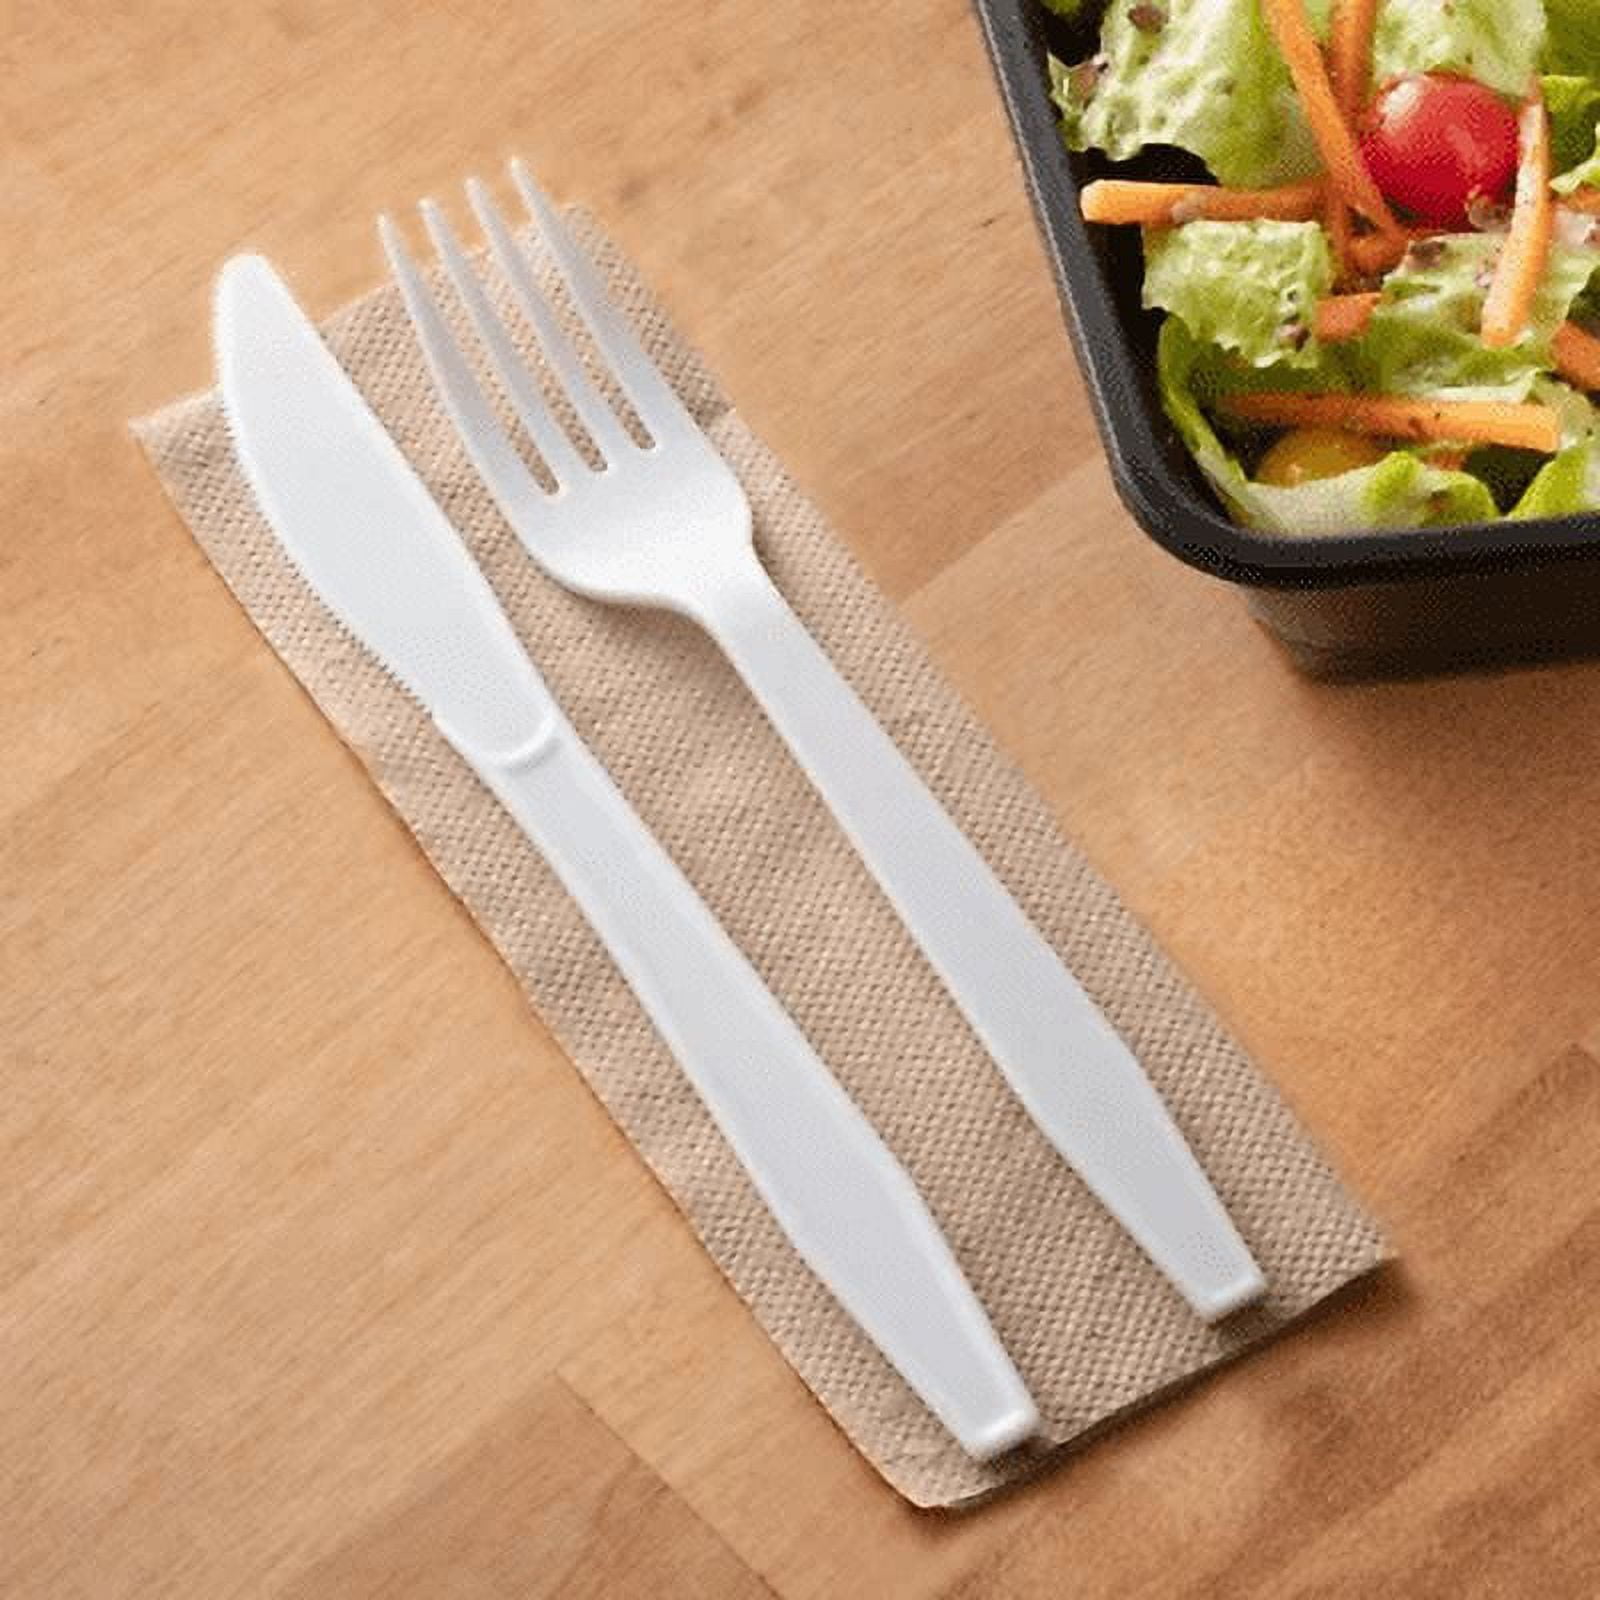 Visions White Heavy Weight Plastic Knife - Pack of 100